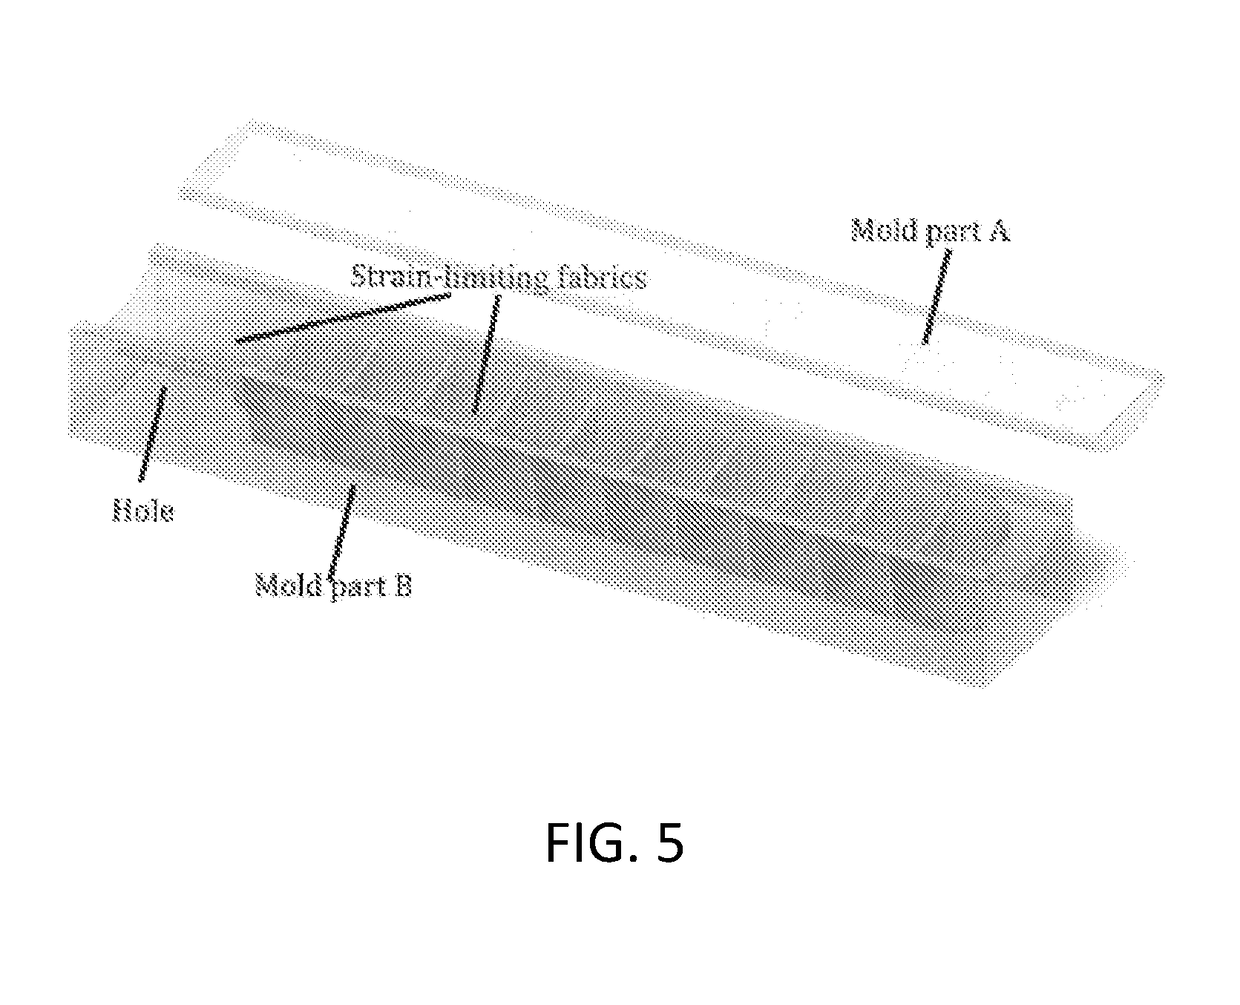 Waveguides for use in sensors or displays